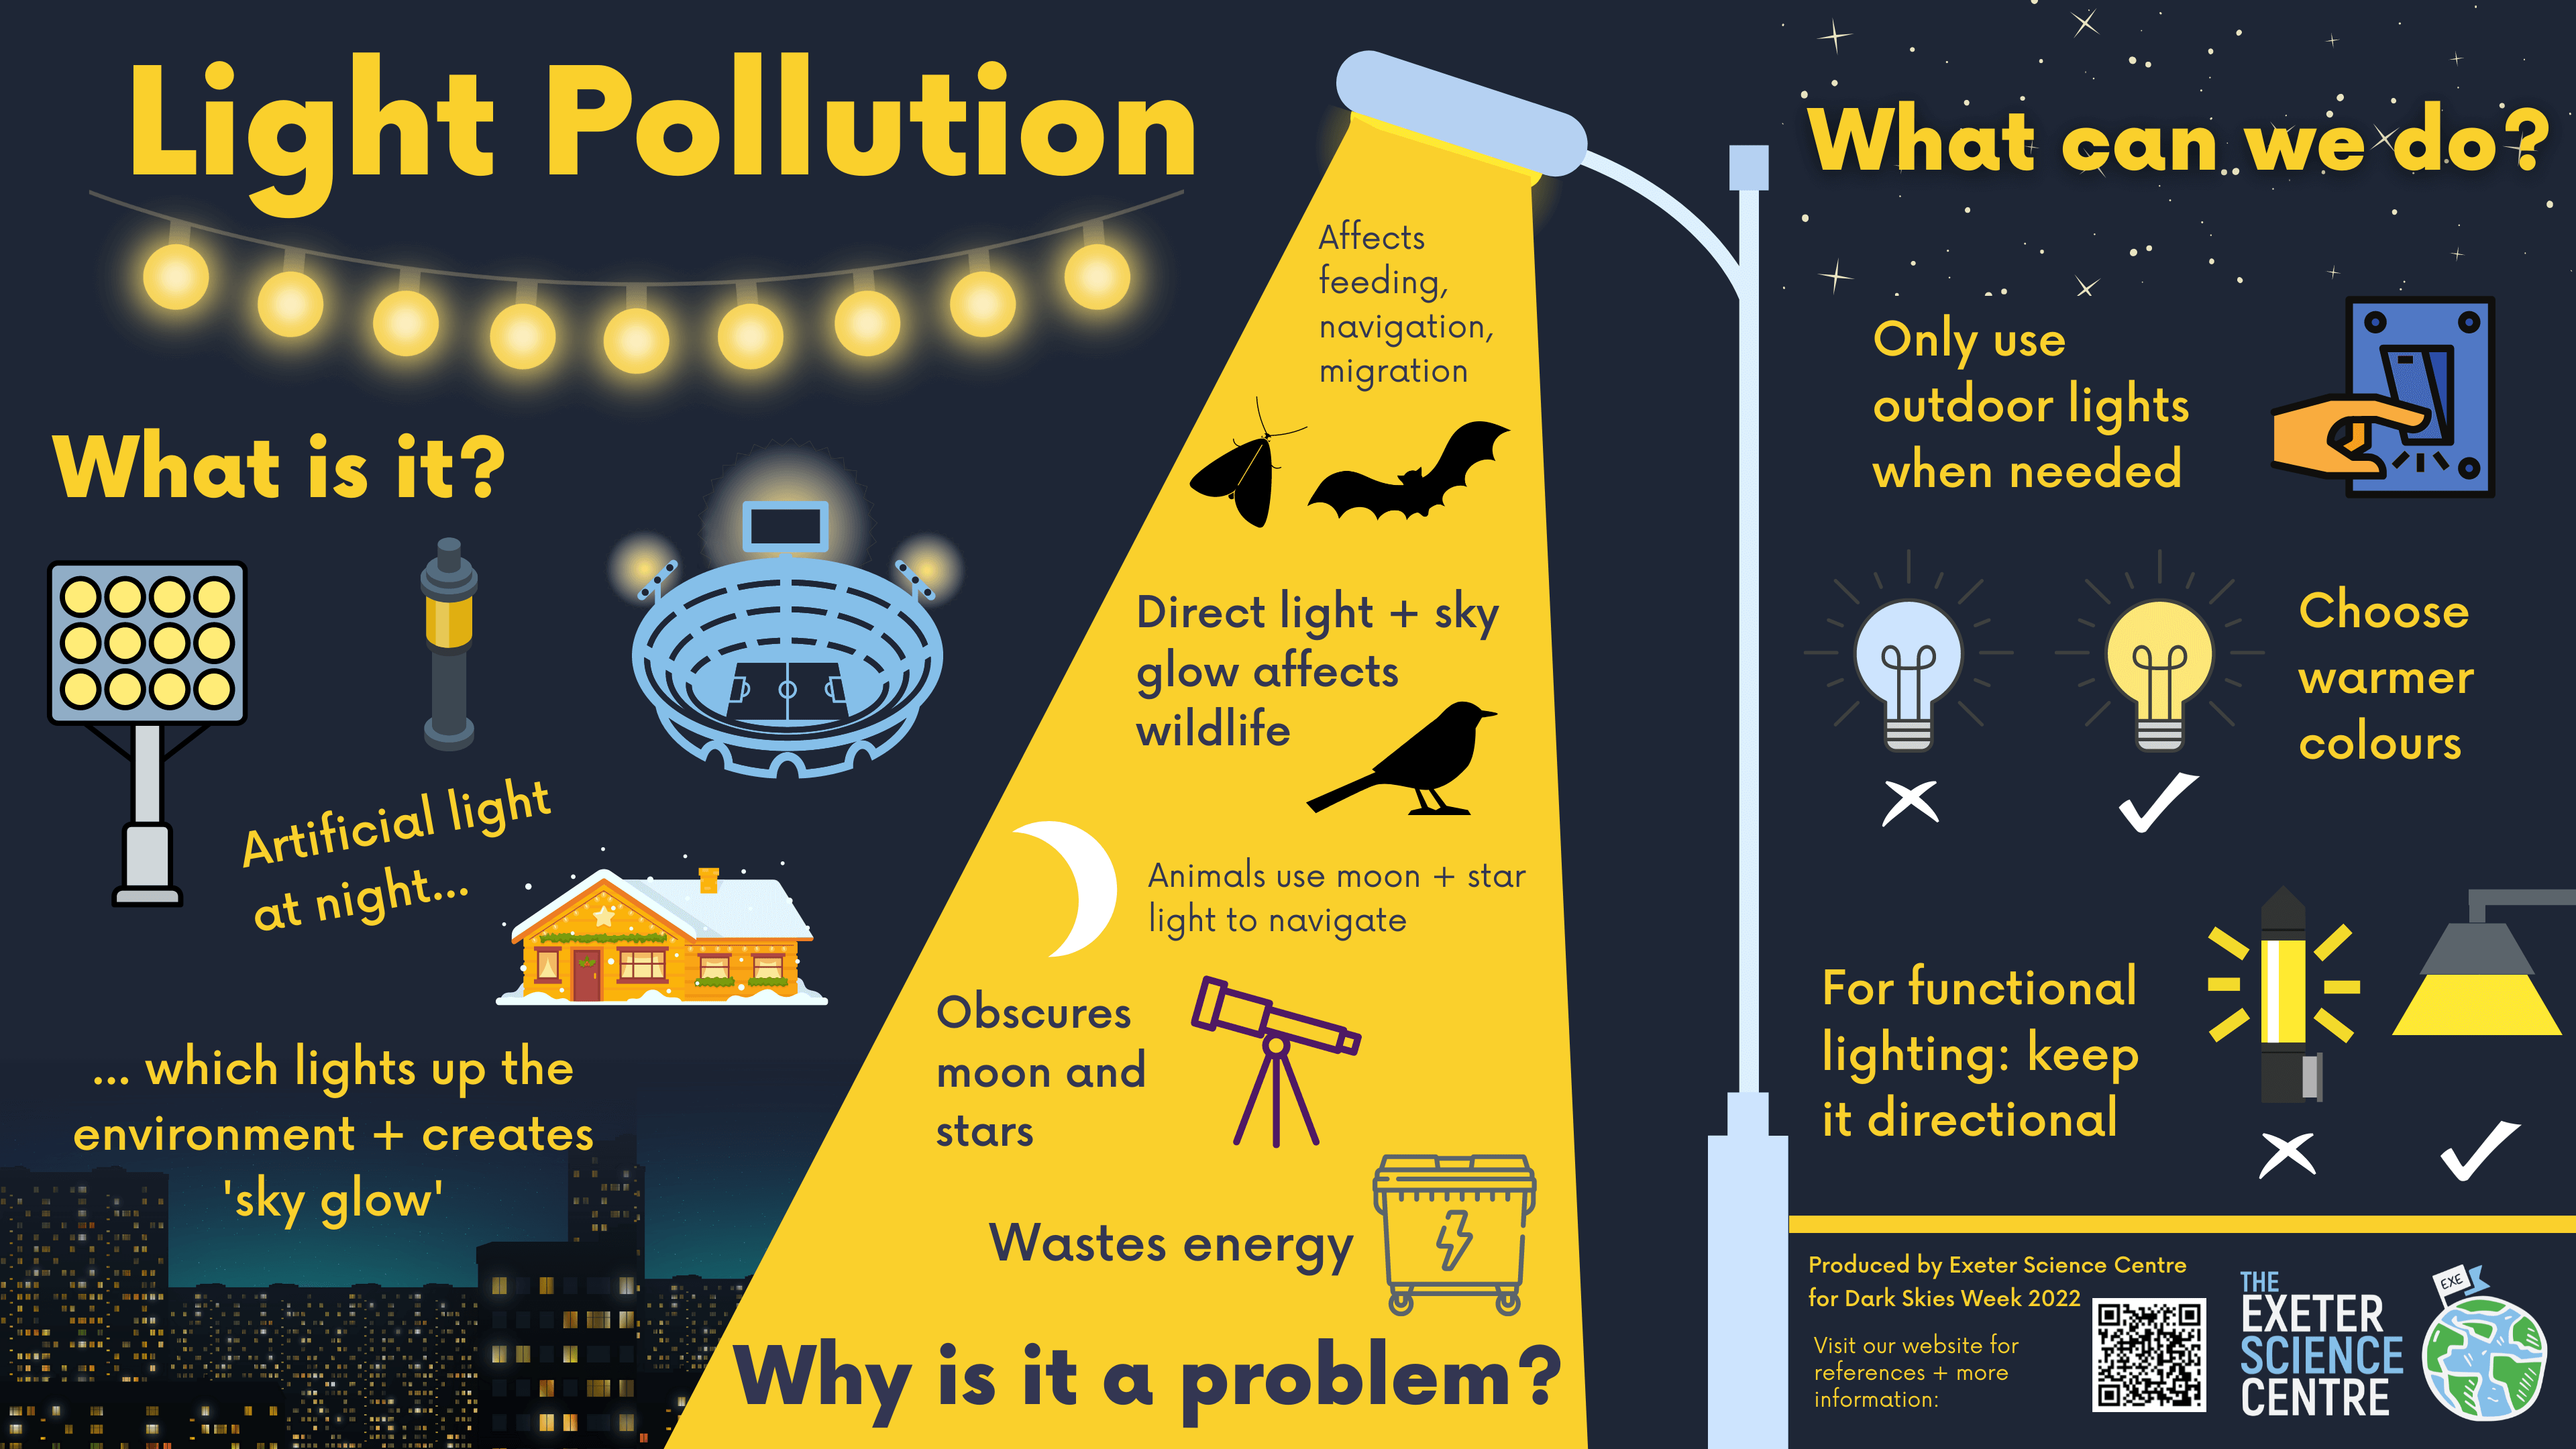 Light pollution negatively affects wildlife, obscures the moon and stars, and wastes energy - to help: only use outdoor lights when needed, choose warmer light bulb colours, and for functional lighting: keep it directional